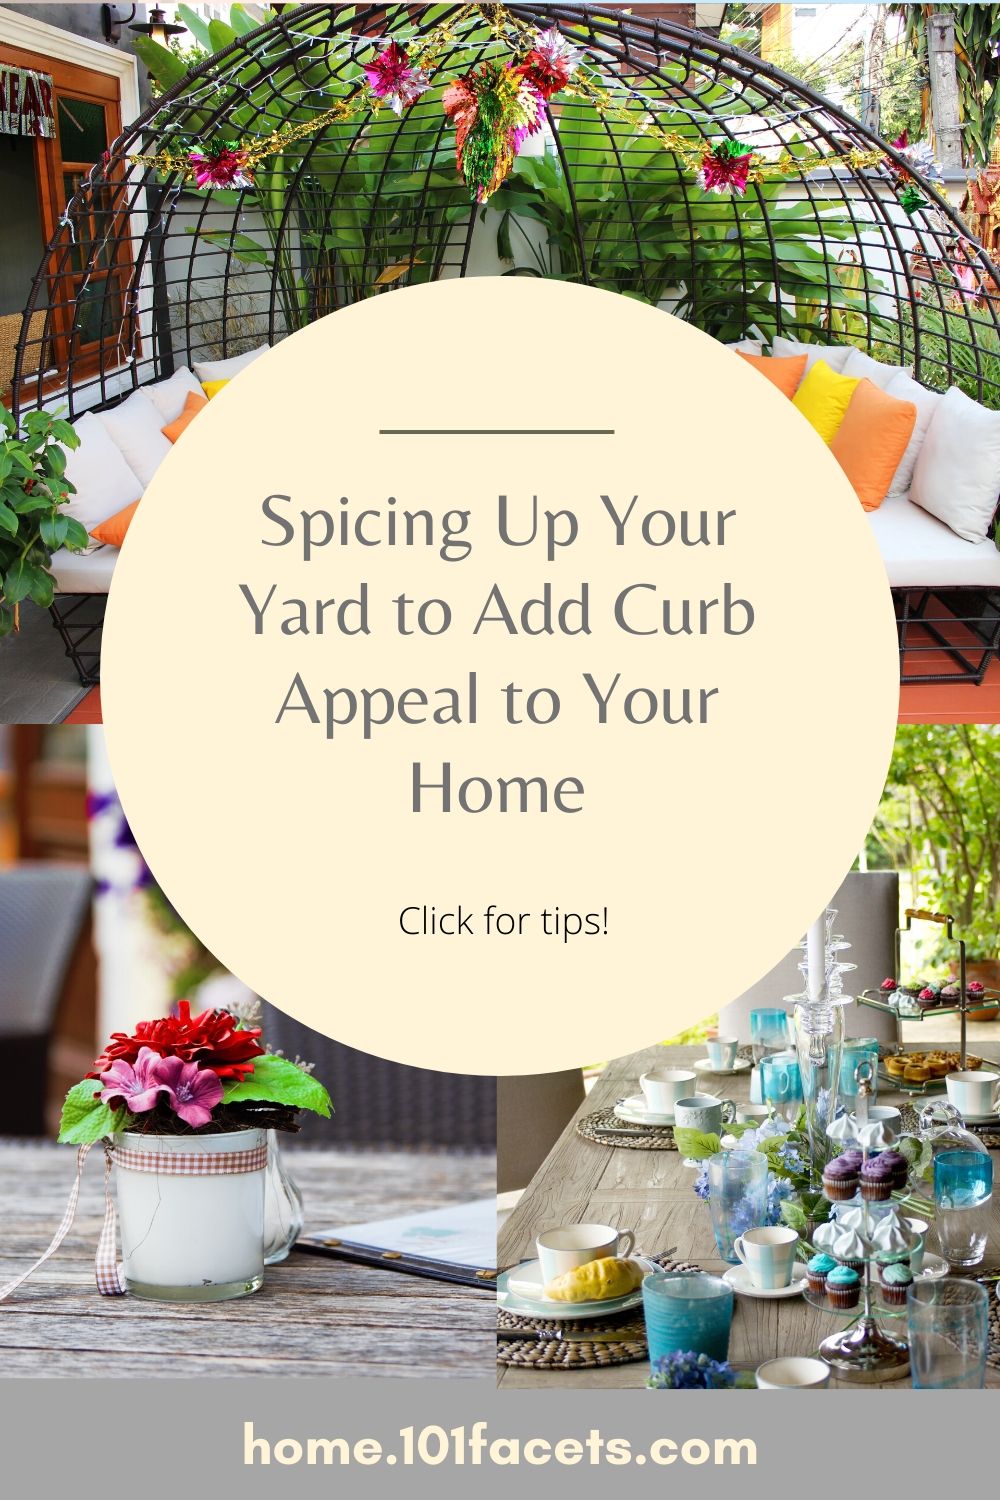 Spicing Up Your Yard to Add Curb Appeal to Your Home